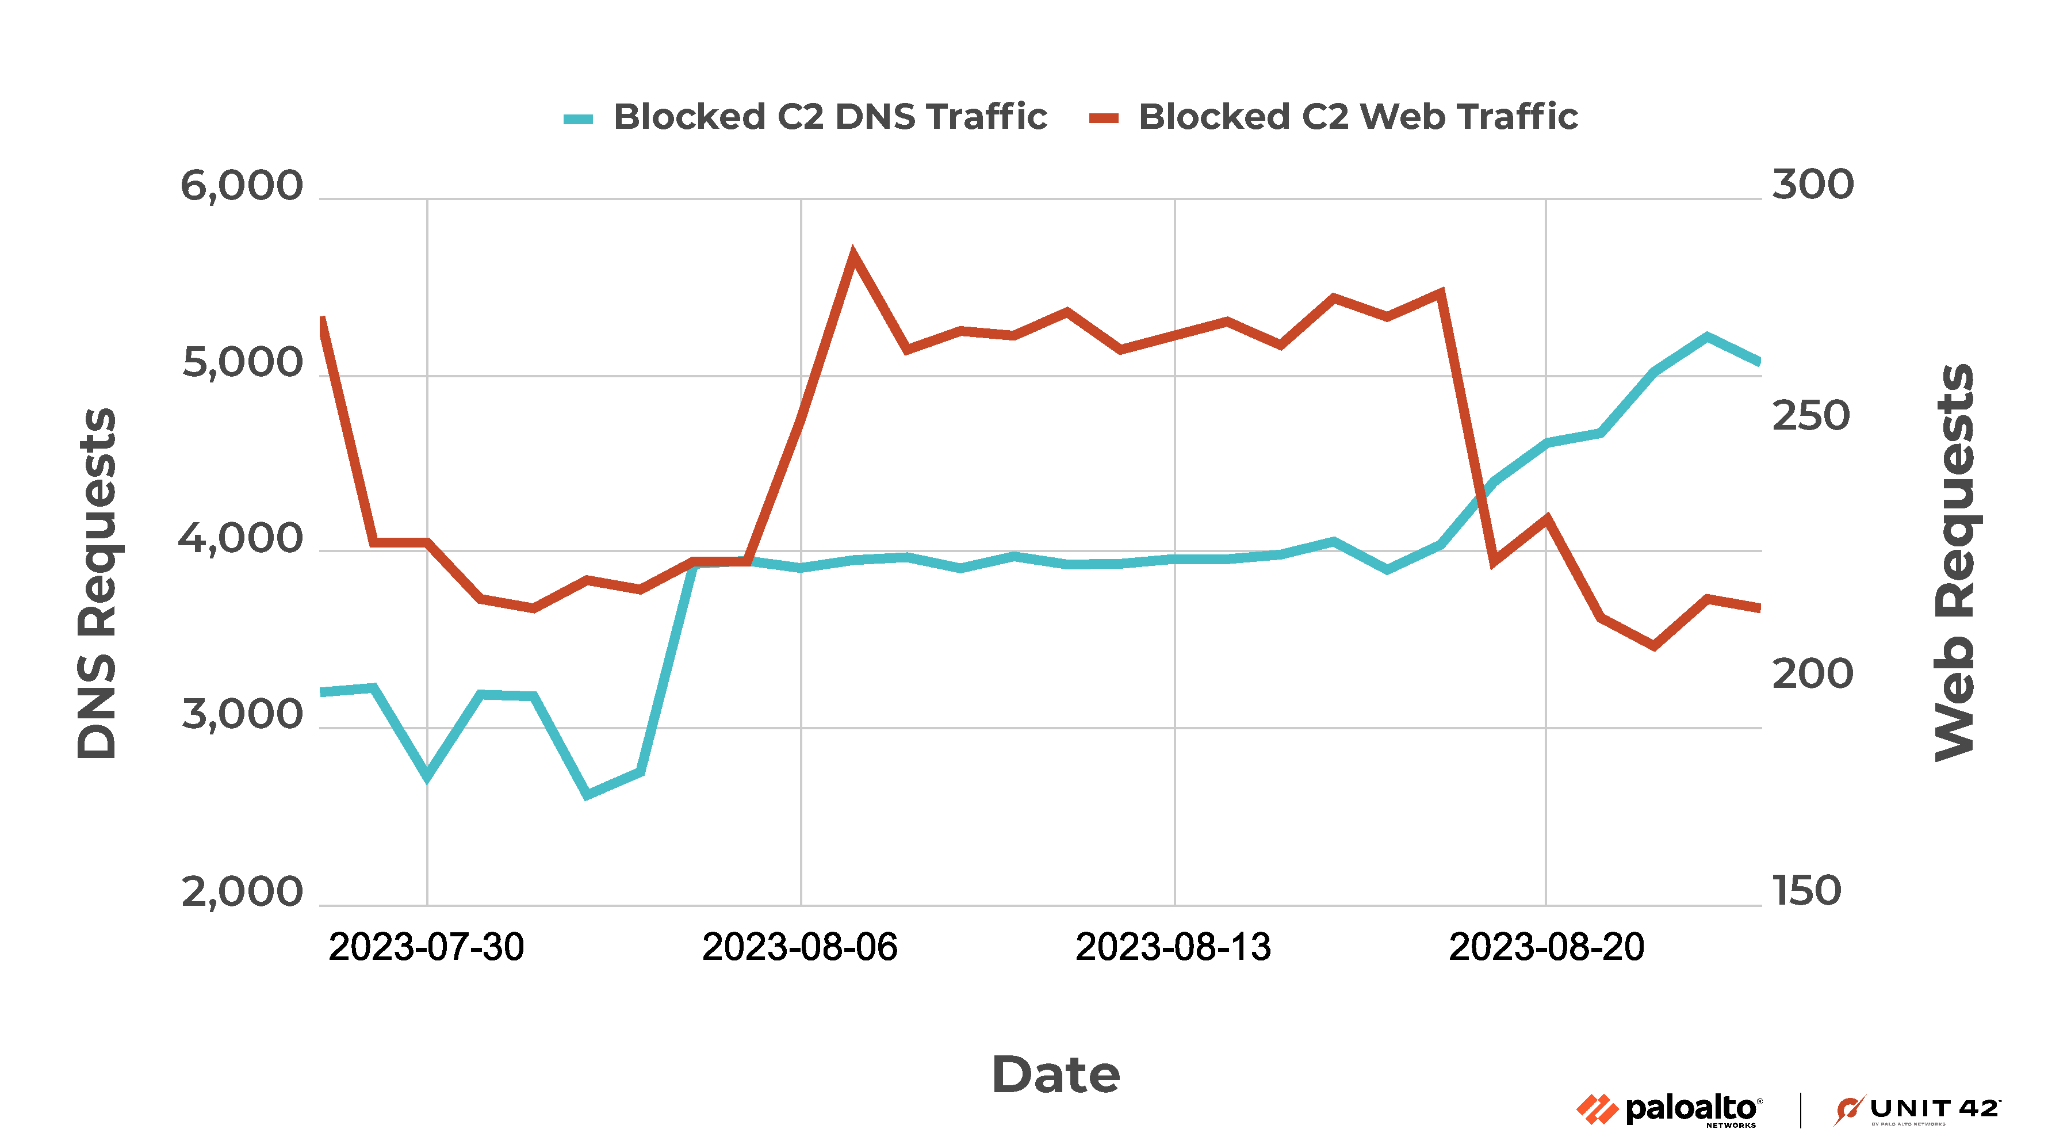 Image 11 is a trend graph of the command and control traffic as it was blocked by Advanced URL Filtering and DNS Security. The blue is the blocked command and control DNS traffic. The red is the number of blocked command and control web traffic.